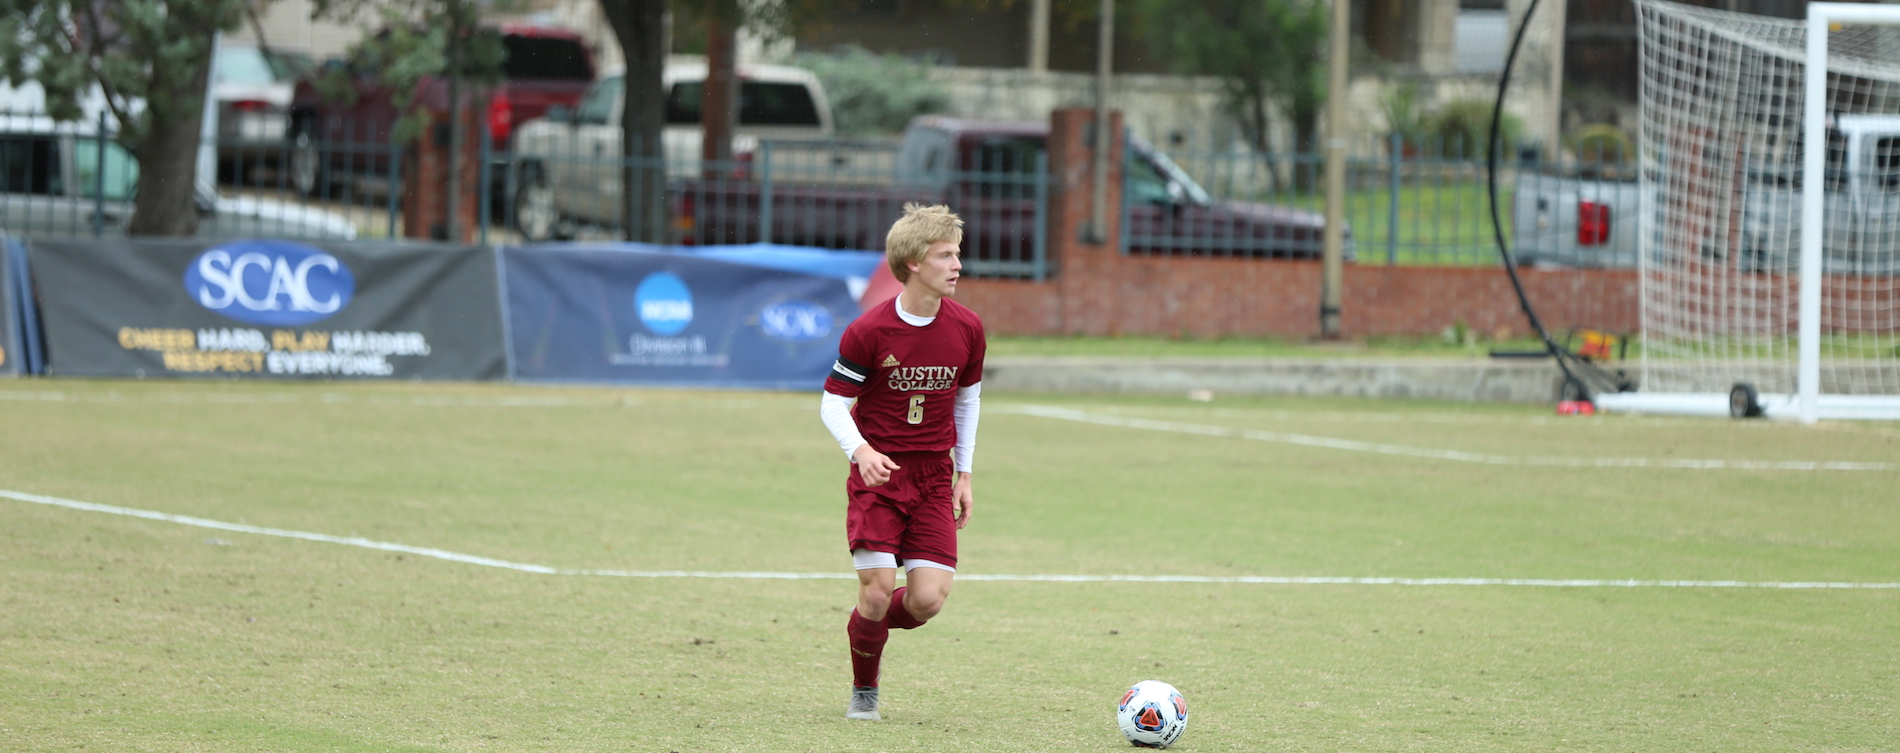 'Roos Advance to SCAC Semifinals